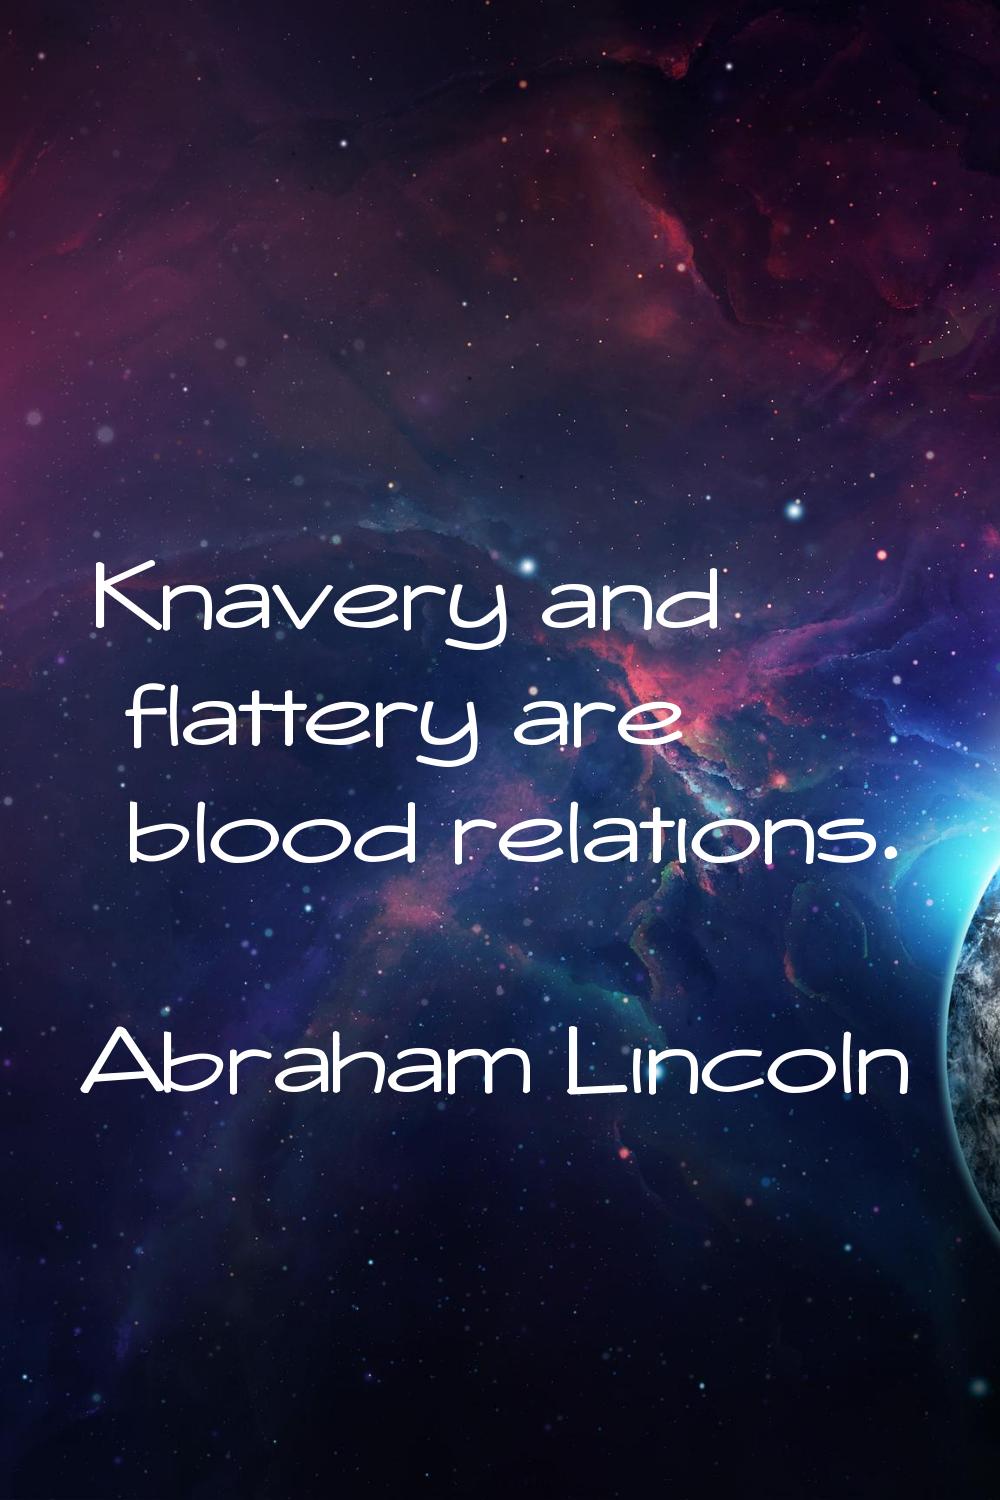 Knavery and flattery are blood relations.